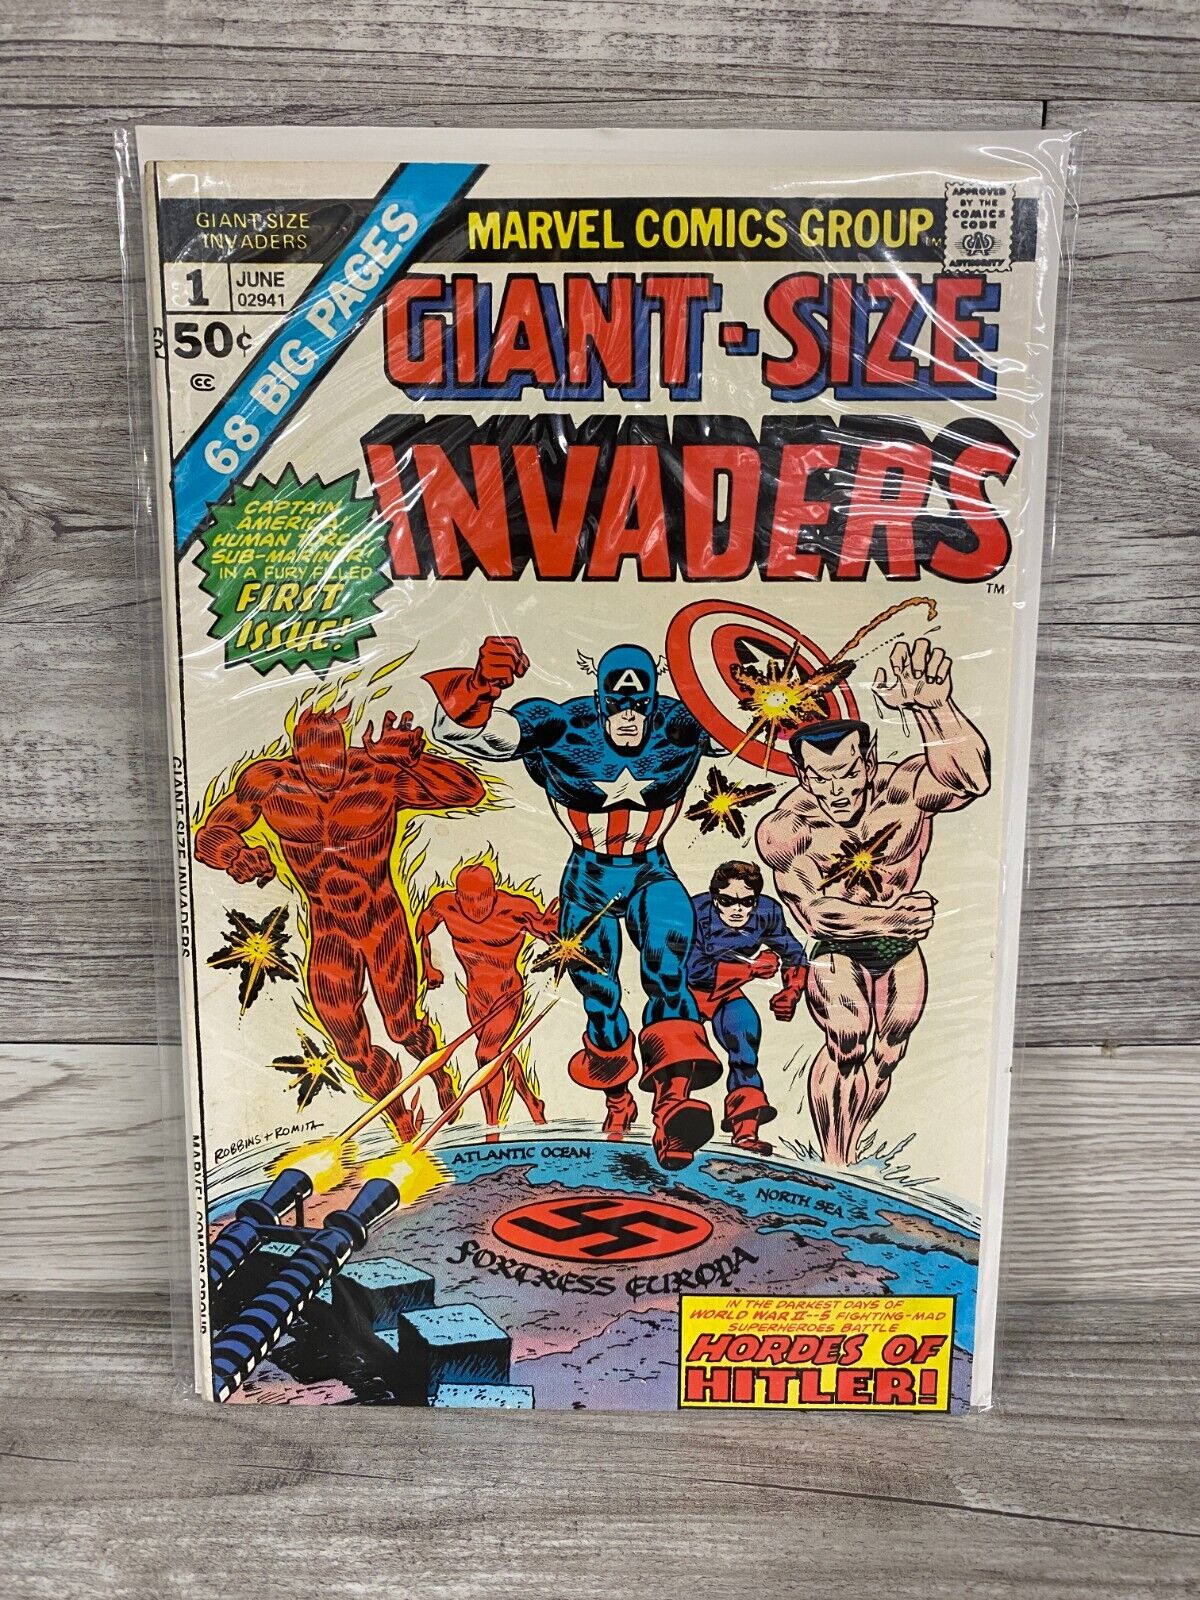 Giant-Size Invaders #1 Marvel Comics 1975 1st Bronze Age Team